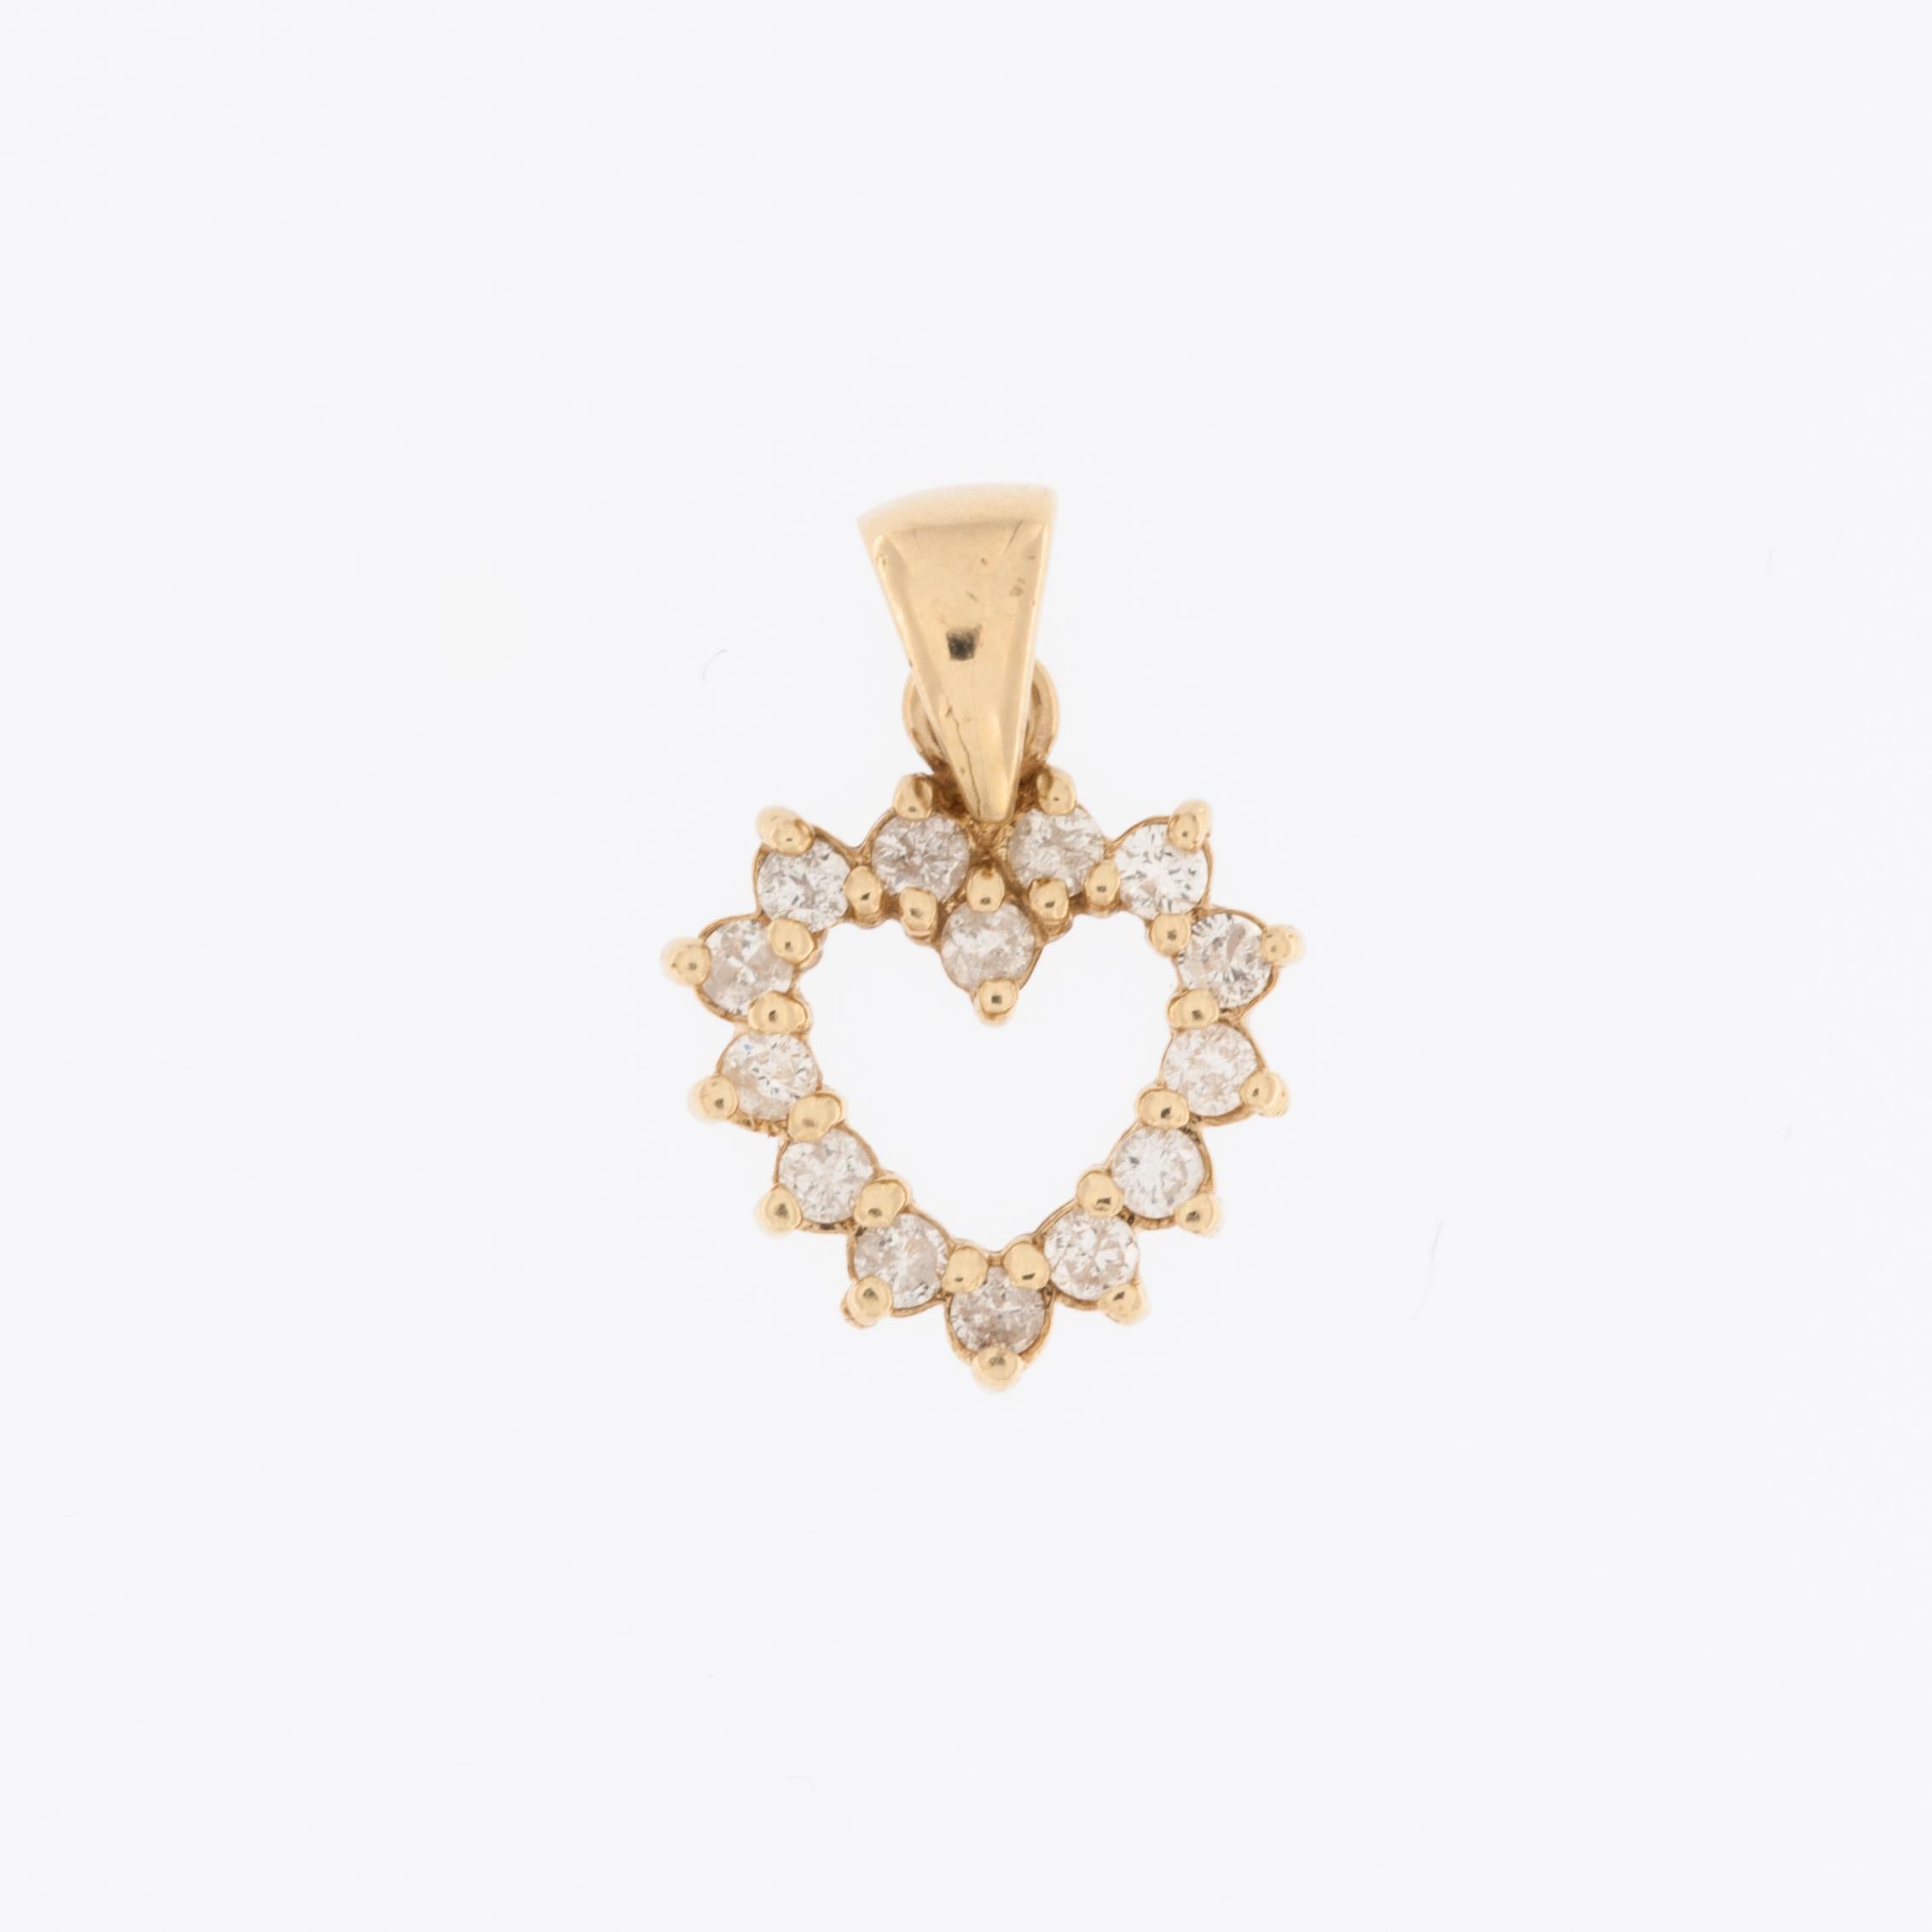 The Italian Diamonds Heart Pendant in Yellow Gold is a captivating expression of love and refinement. Crafted with meticulous attention to detail, this pendant features a heart-shaped design crafted from 18-karat yellow gold, exuding warmth and